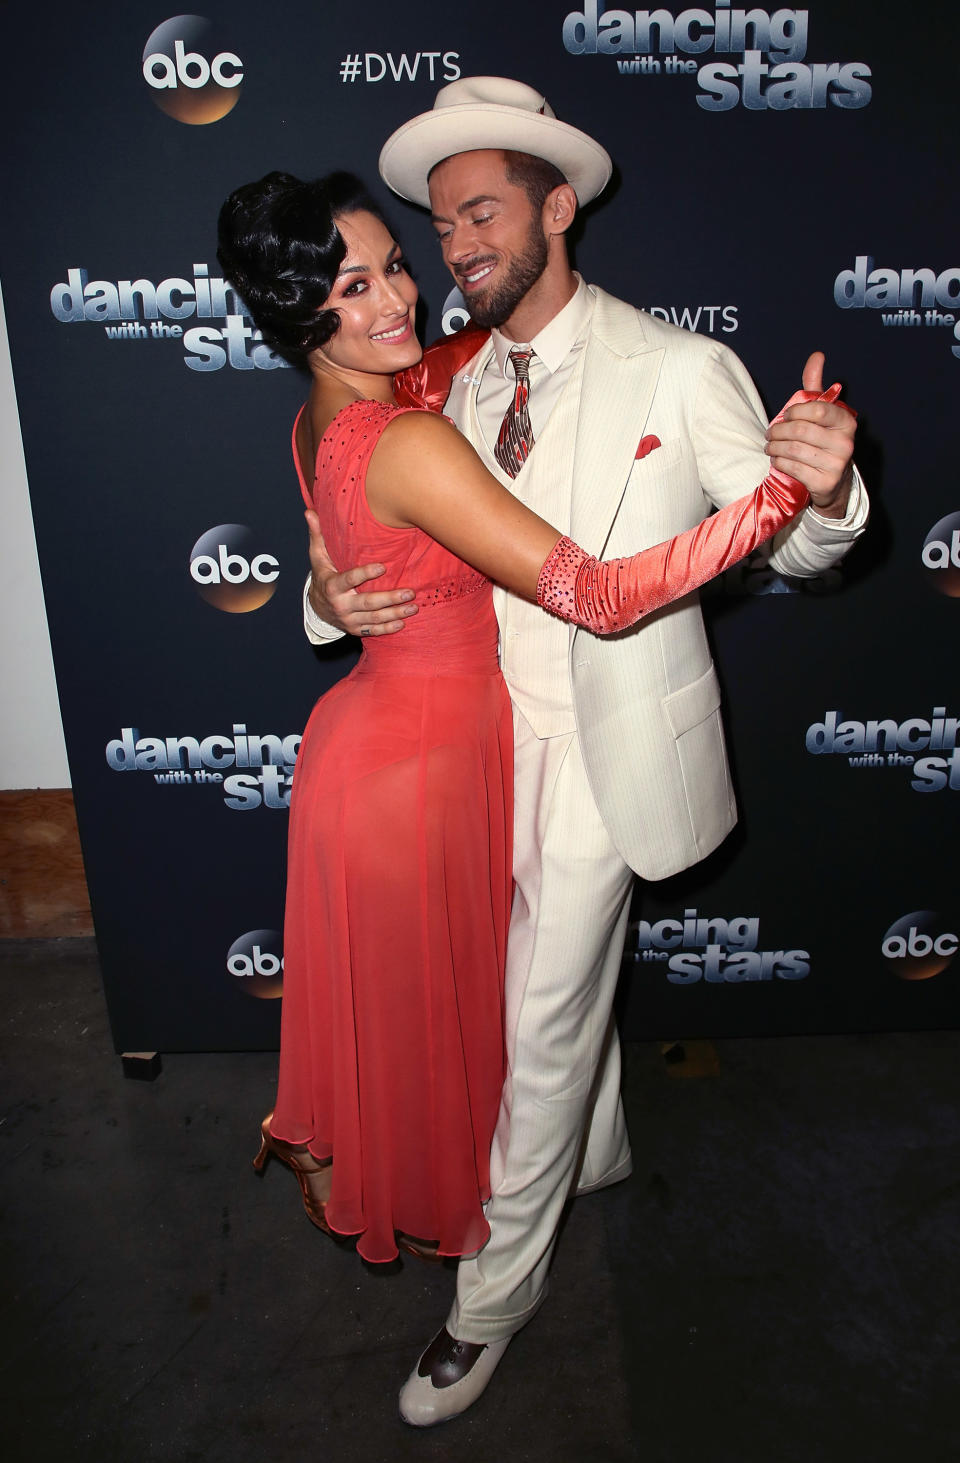 Professional wrestler Nikki Bella (L) and dancer Artem Chigvintsev pose at "Dancing with the Stars" season 25 at CBS Televison City on October 23, 2017 in Los Angeles, California.  (Photo by David Livingston/Getty Images)